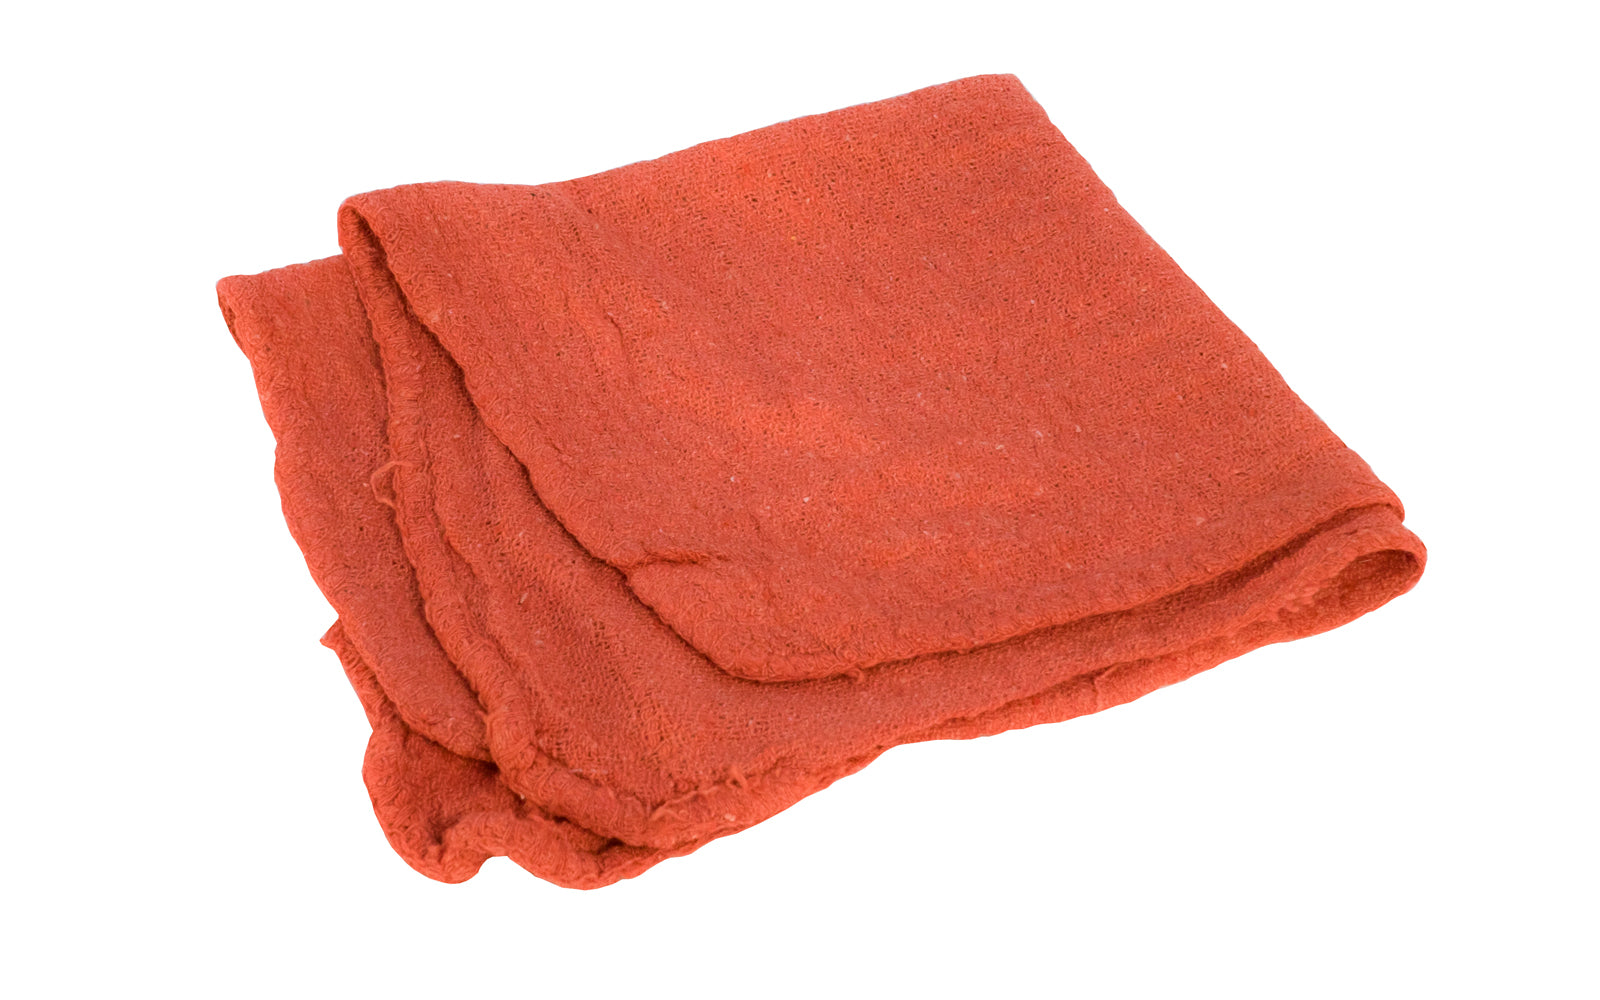 100% Cotton Red Shop Towels. Commercial / Industrial Grade, approx 14